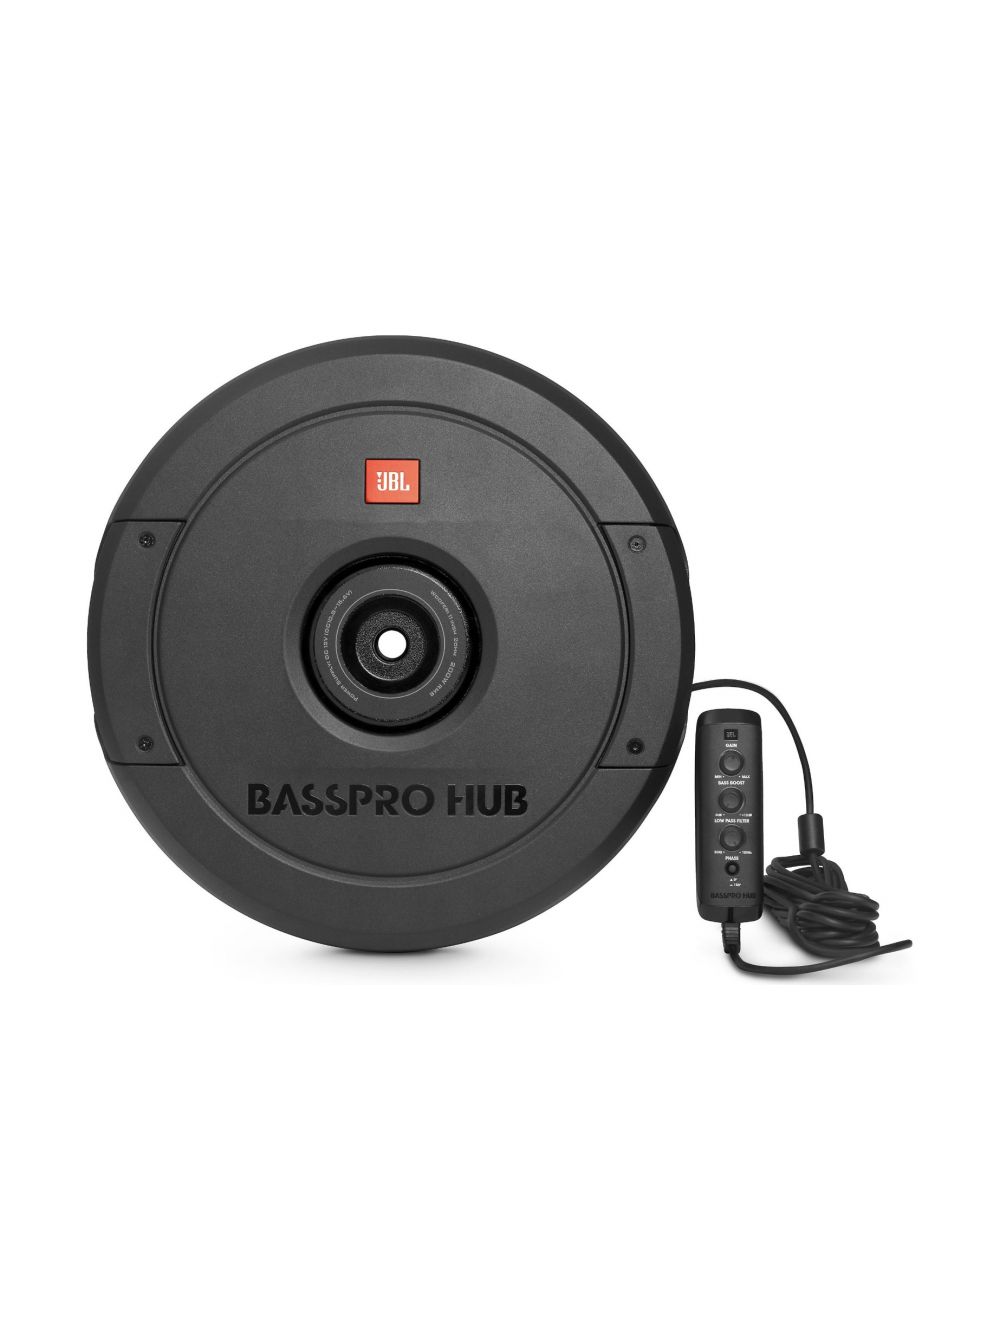 JBL BassPro Hub Powered 11" Car Subwoofer enclosure with 200-watt amp  mounts to hub of spare tire